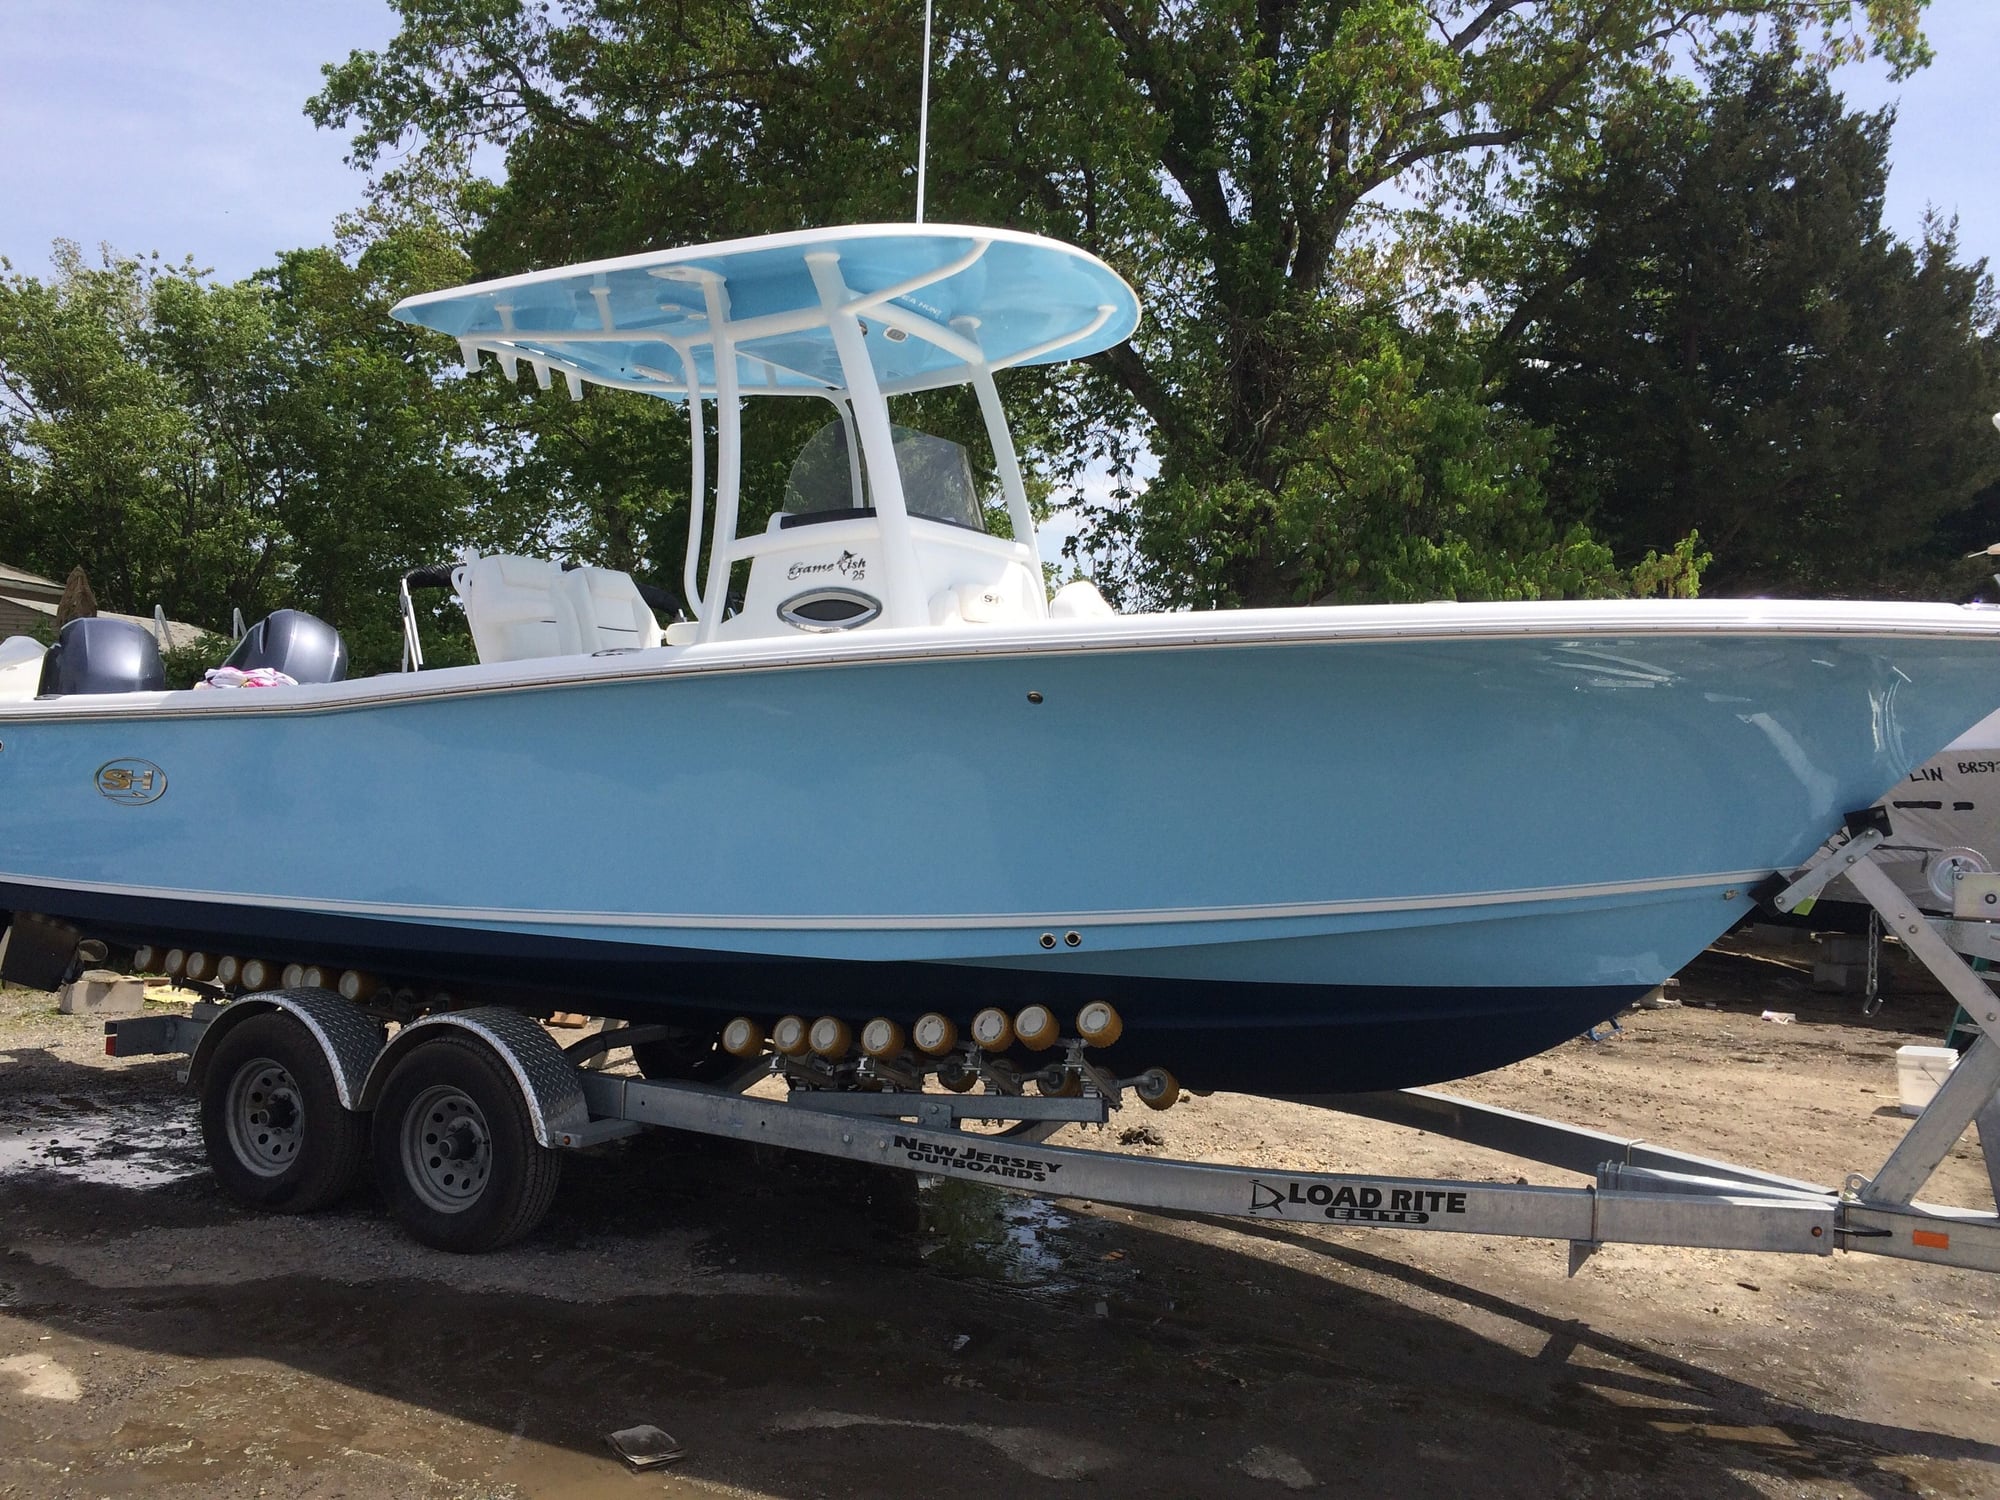 2015 Sea Hunt Gamefish 25 - PRICE REDUCED - The Hull Truth ...